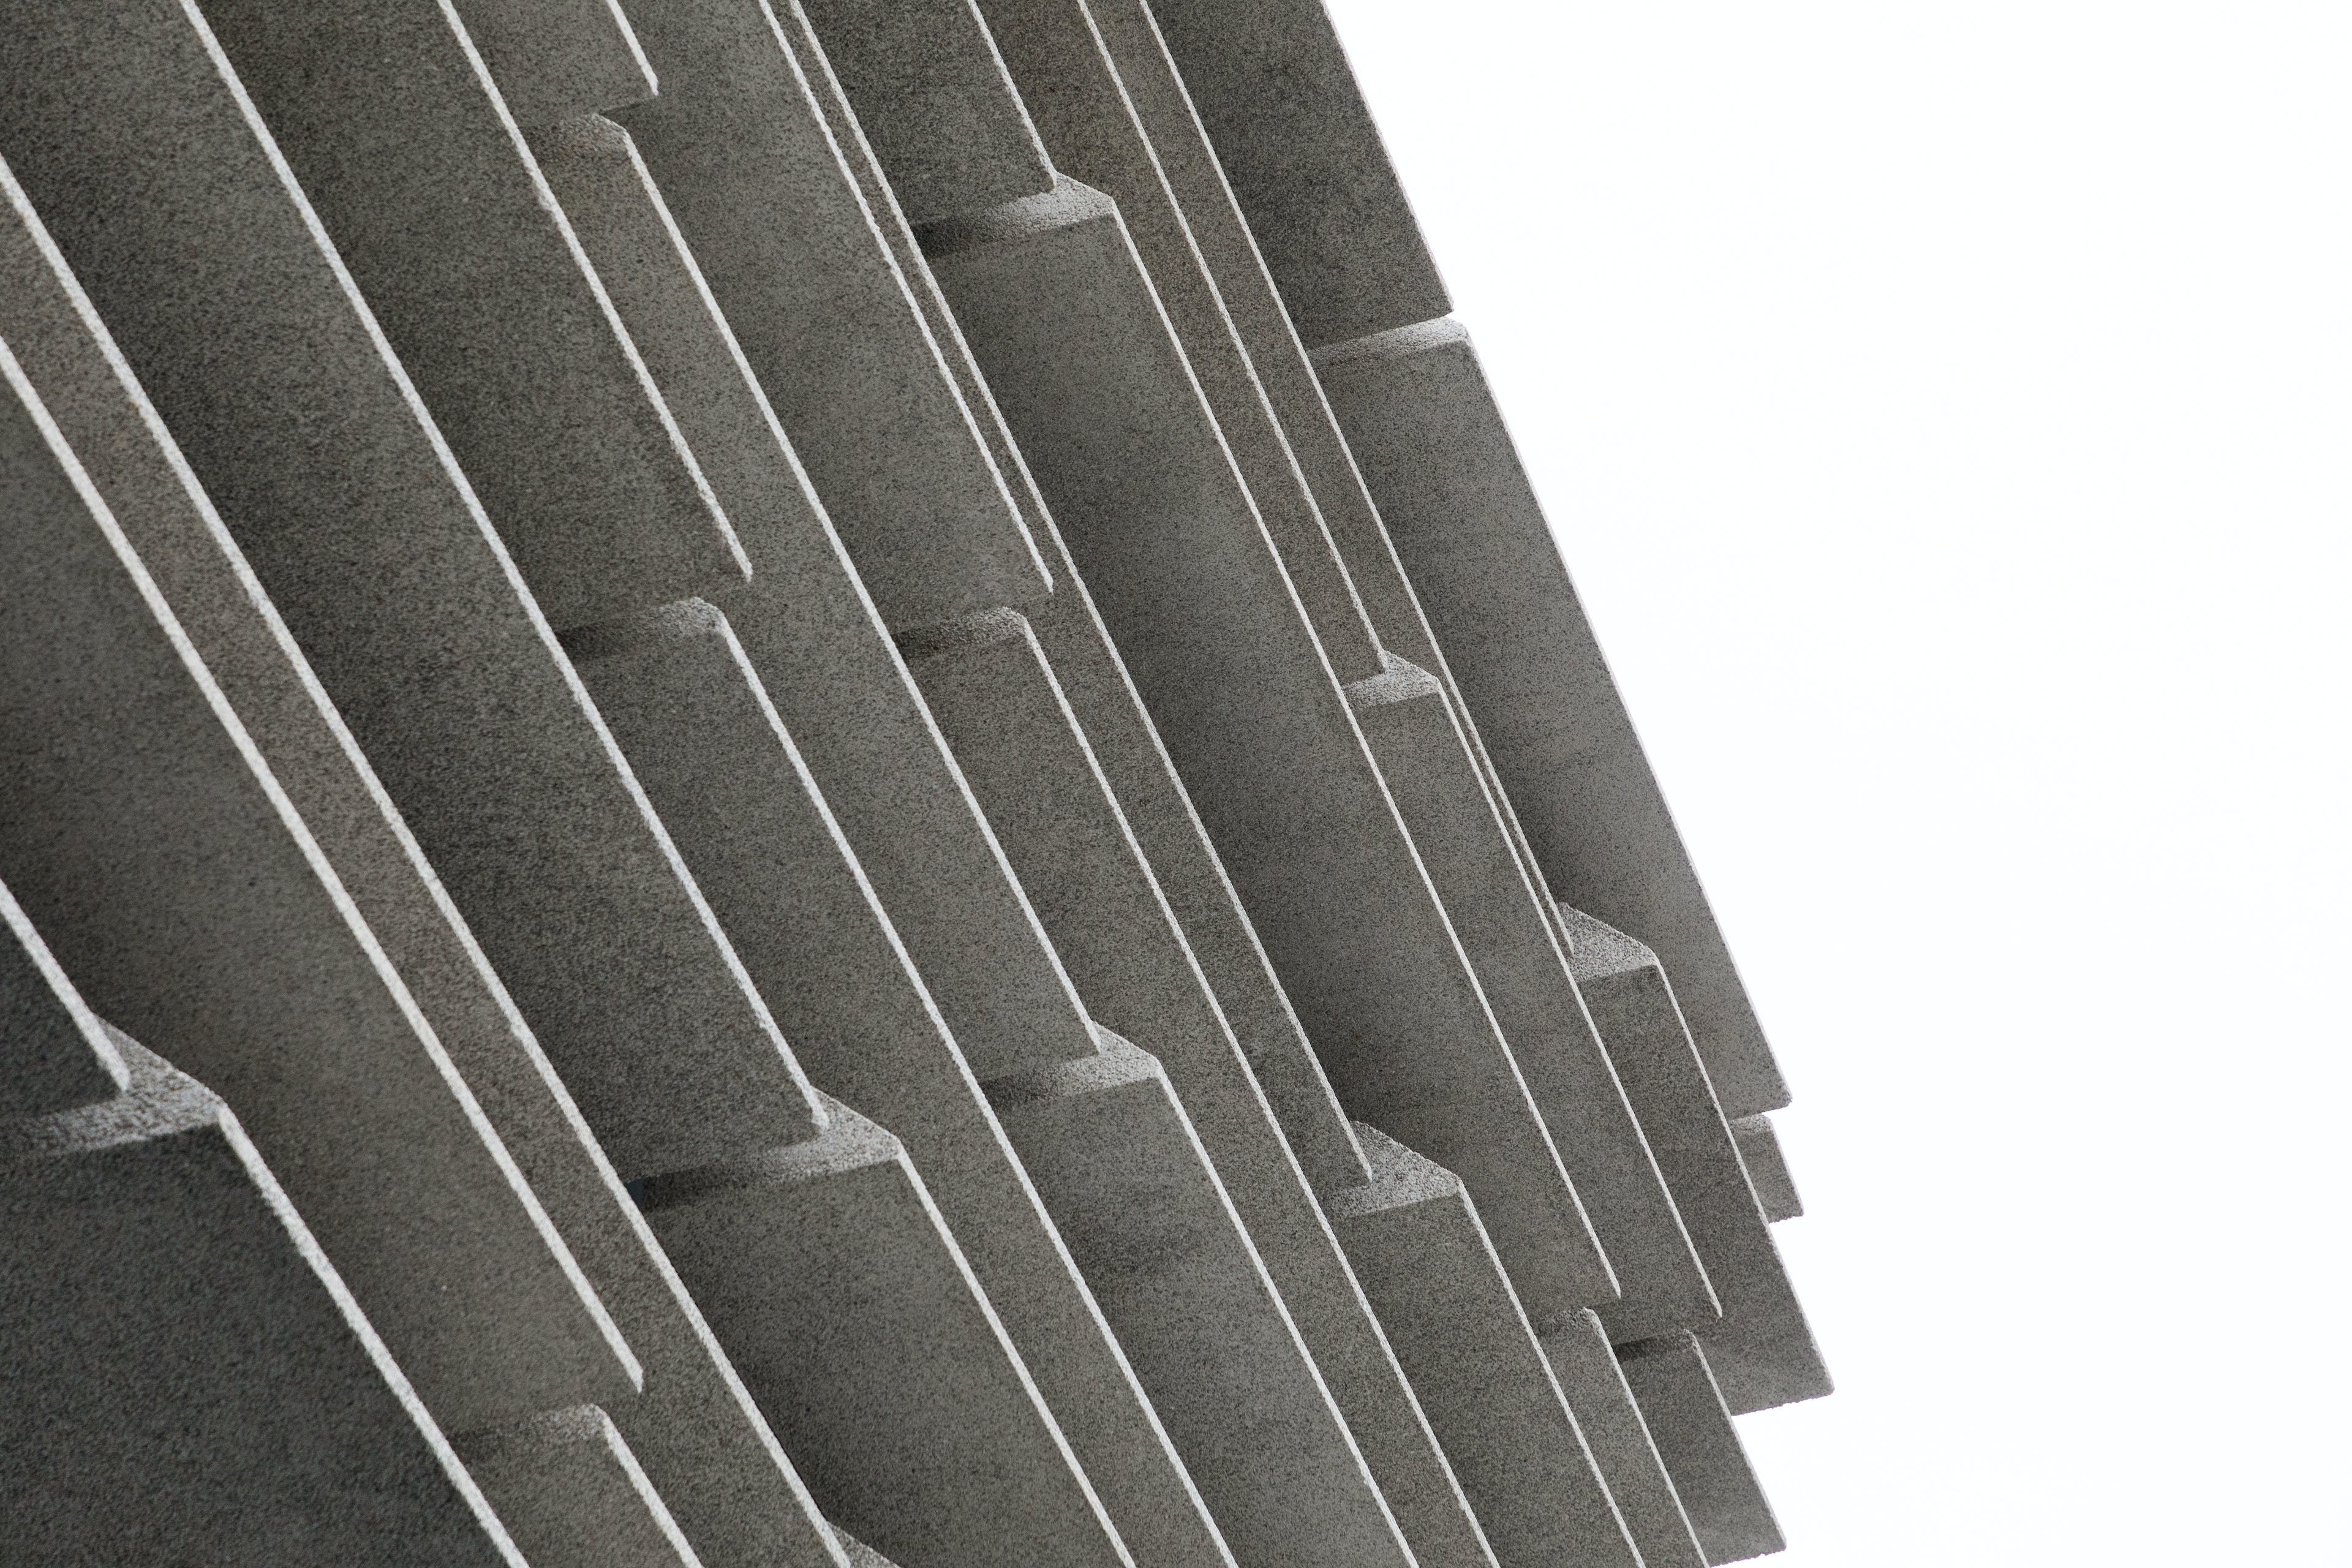 A section of exterior cladding at V&A Dundee